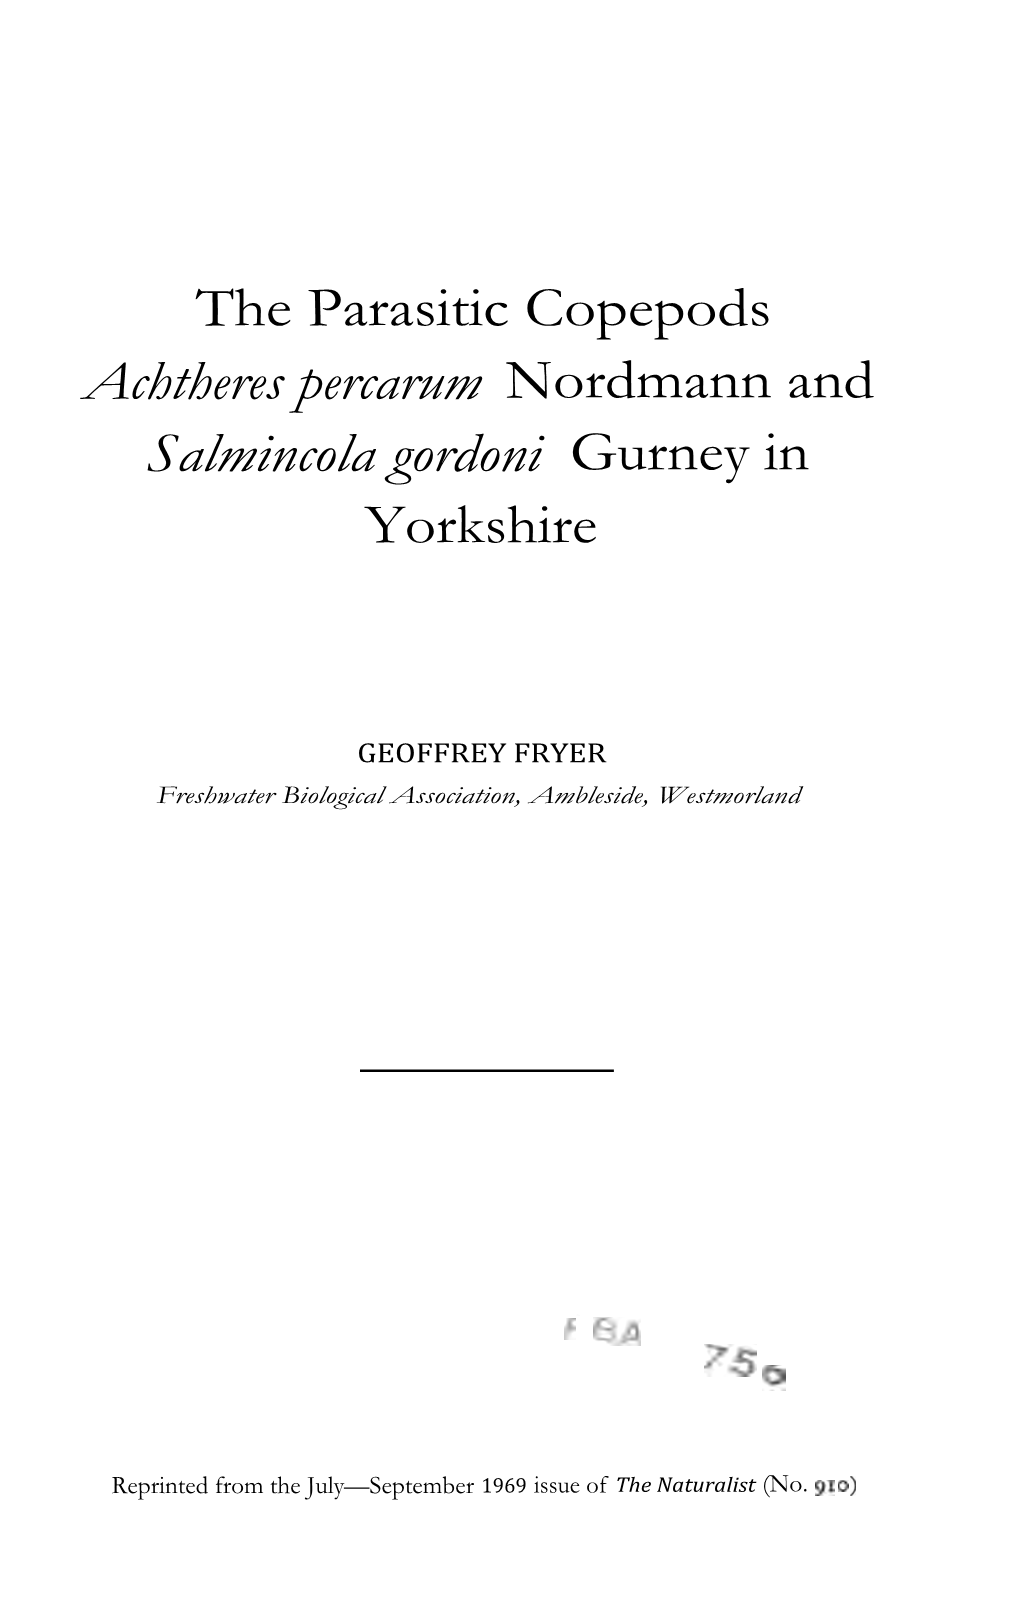 The Parasitic Copepods Achtheres Percarum Nordmann and Salmincola Gordoni Gurney in Yorkshire